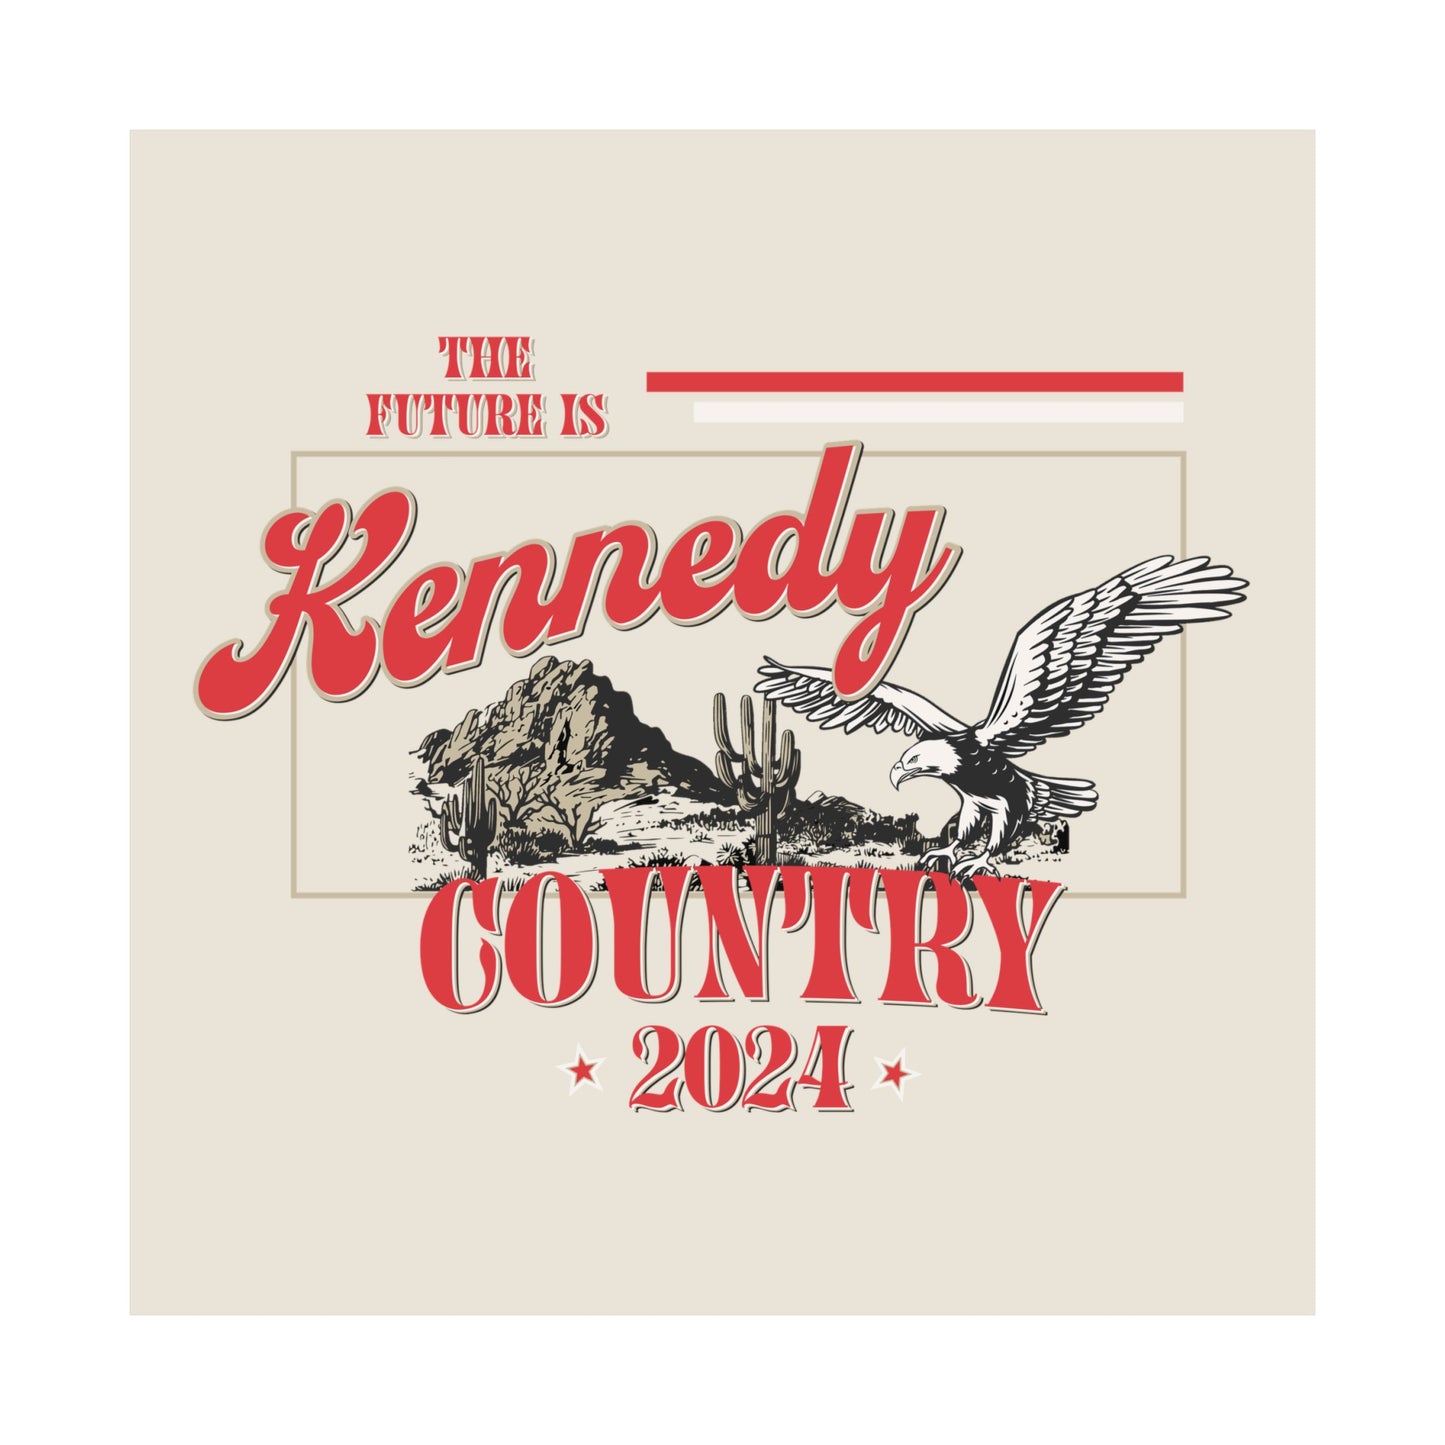 Kennedy Country Poster